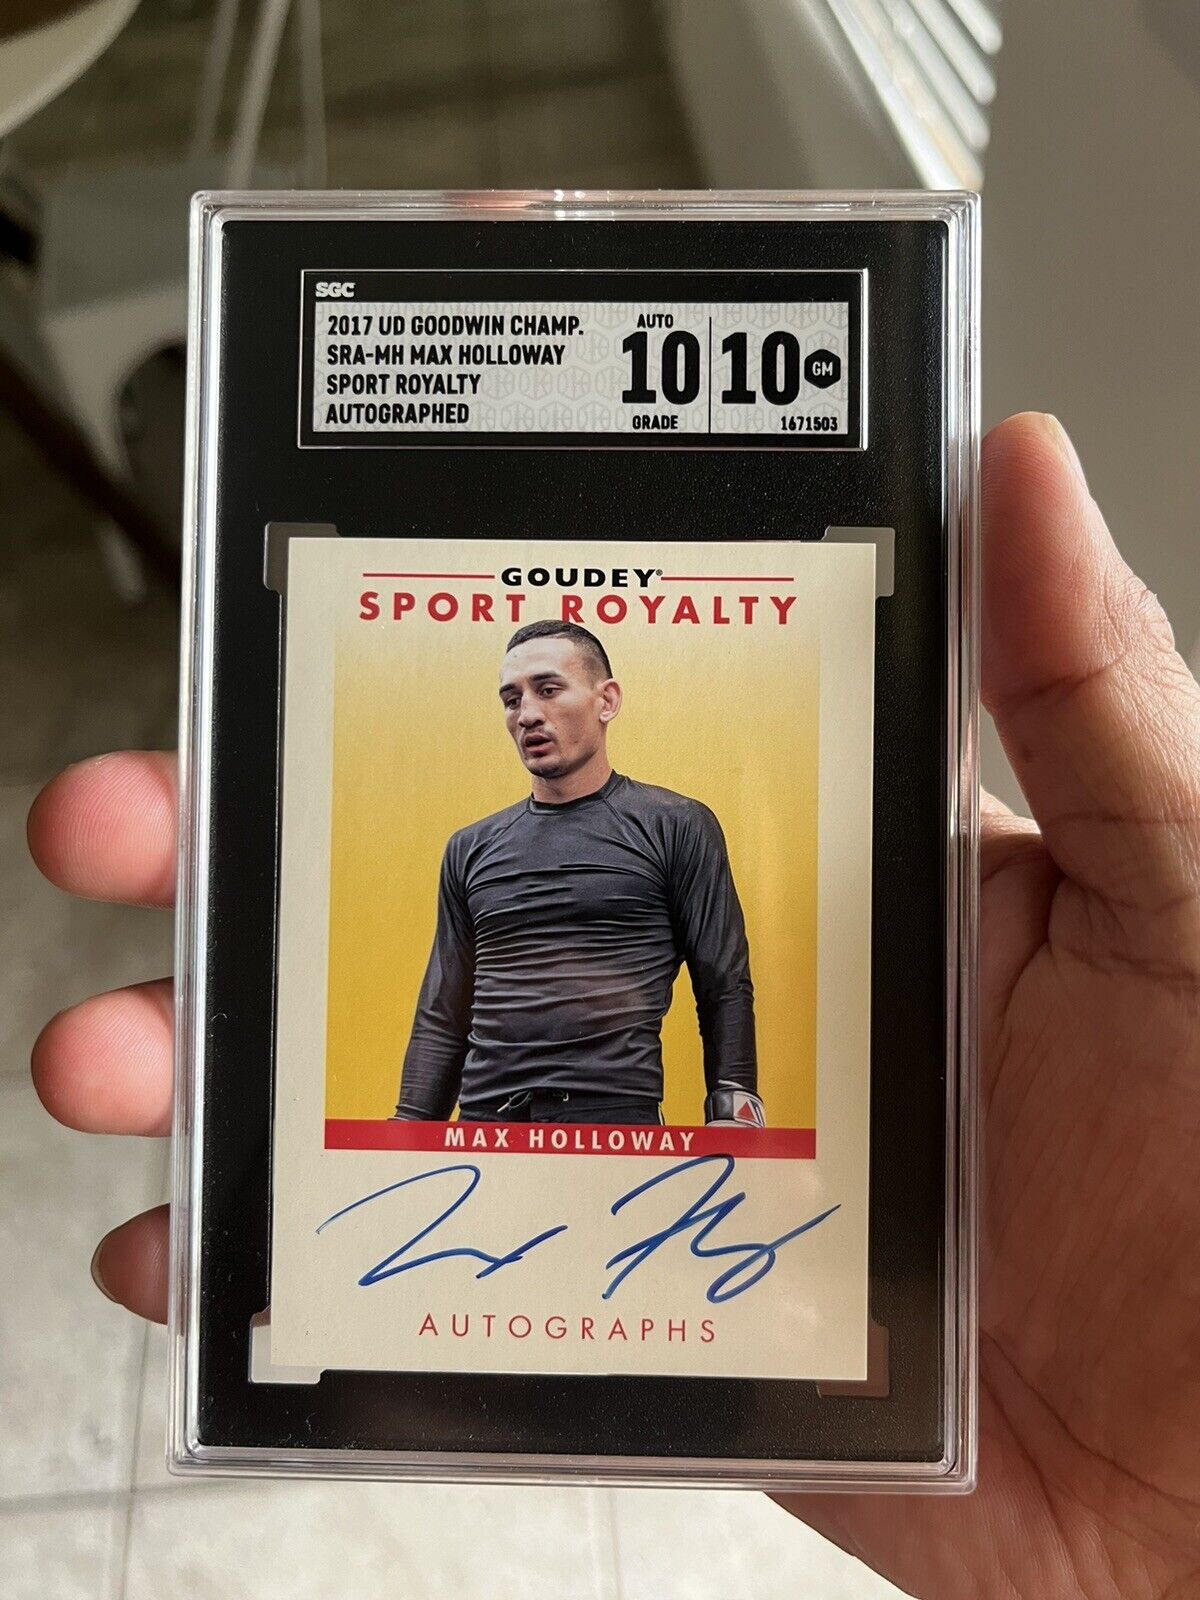 2017 UD Goodwin Champions Goudey Sport Royalty MAX HOLLOWAY SGC 10 Auto 10